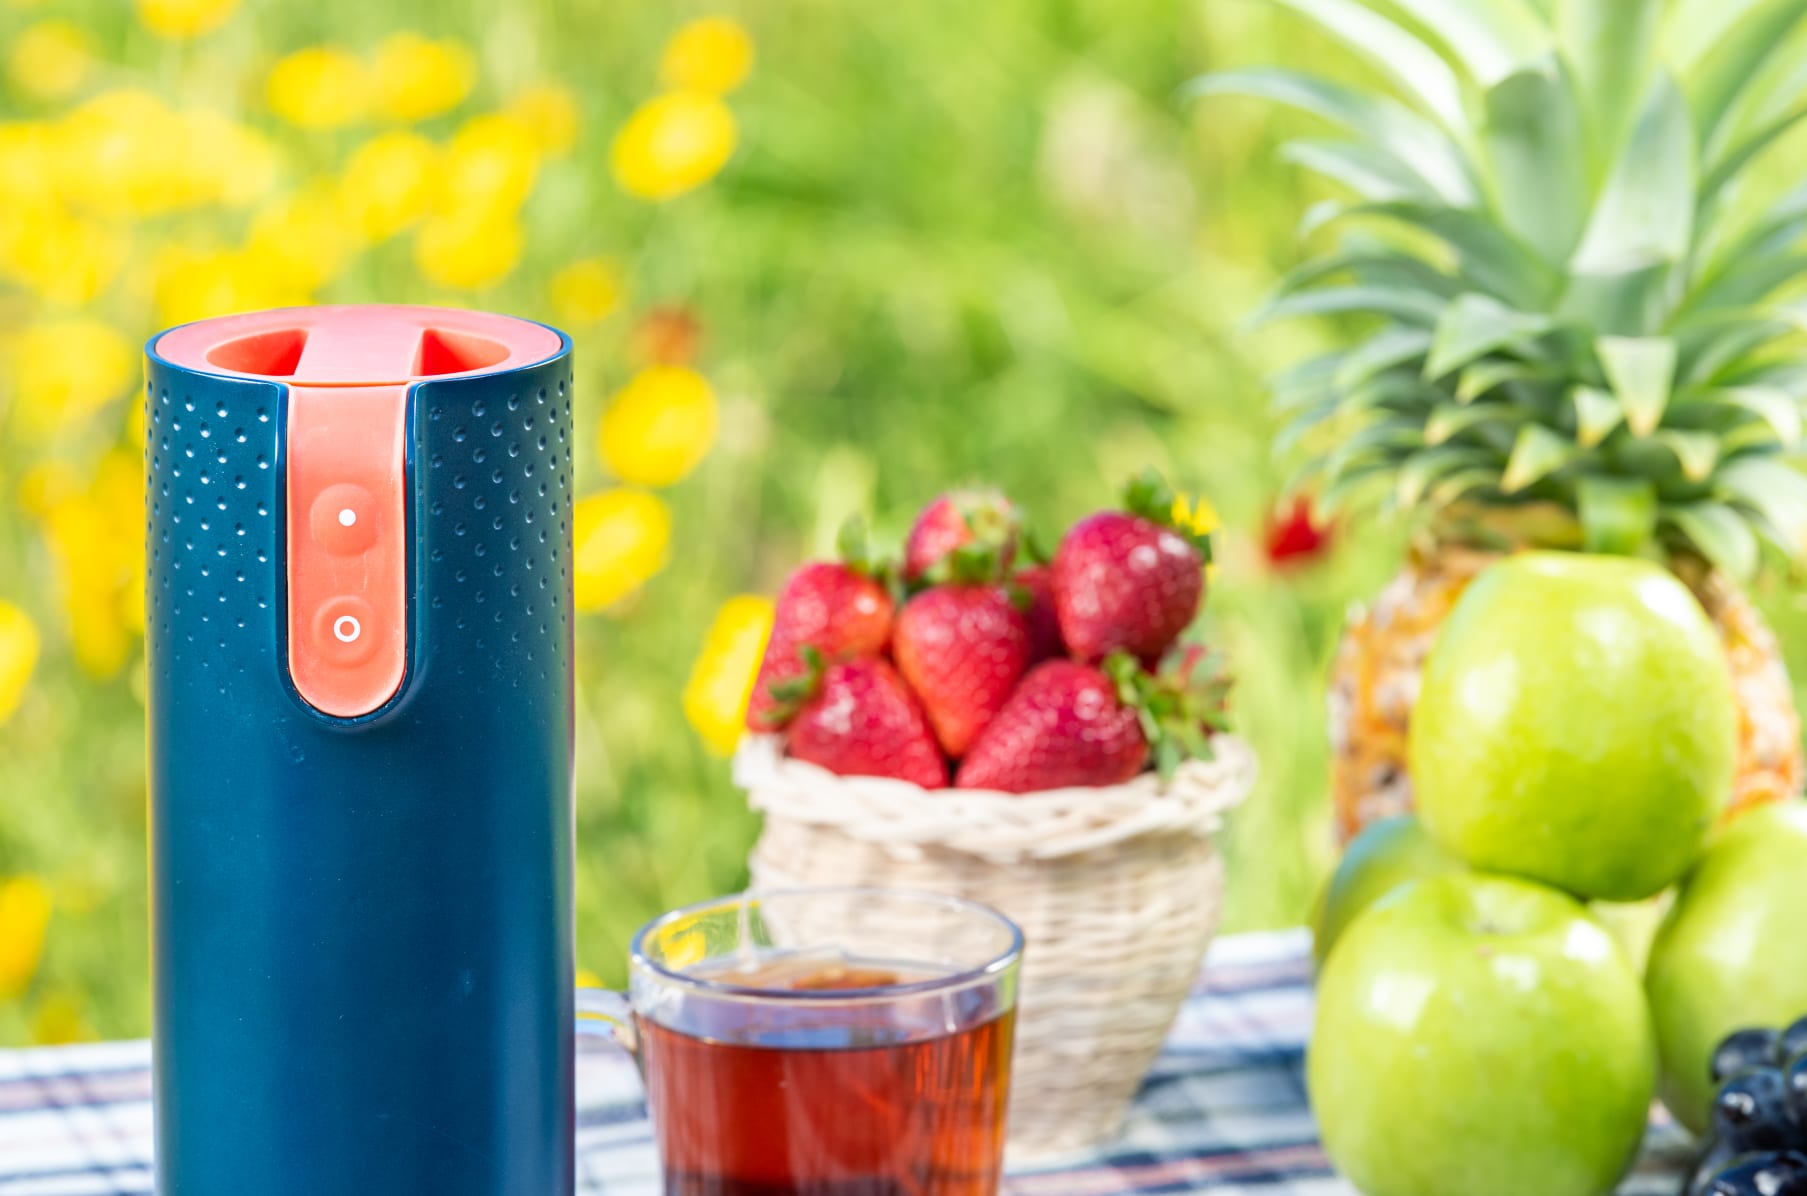 The Kimos Self-Heating Thermos Claims To Be The World's First Self-Heating  Thermos - IMBOLDN